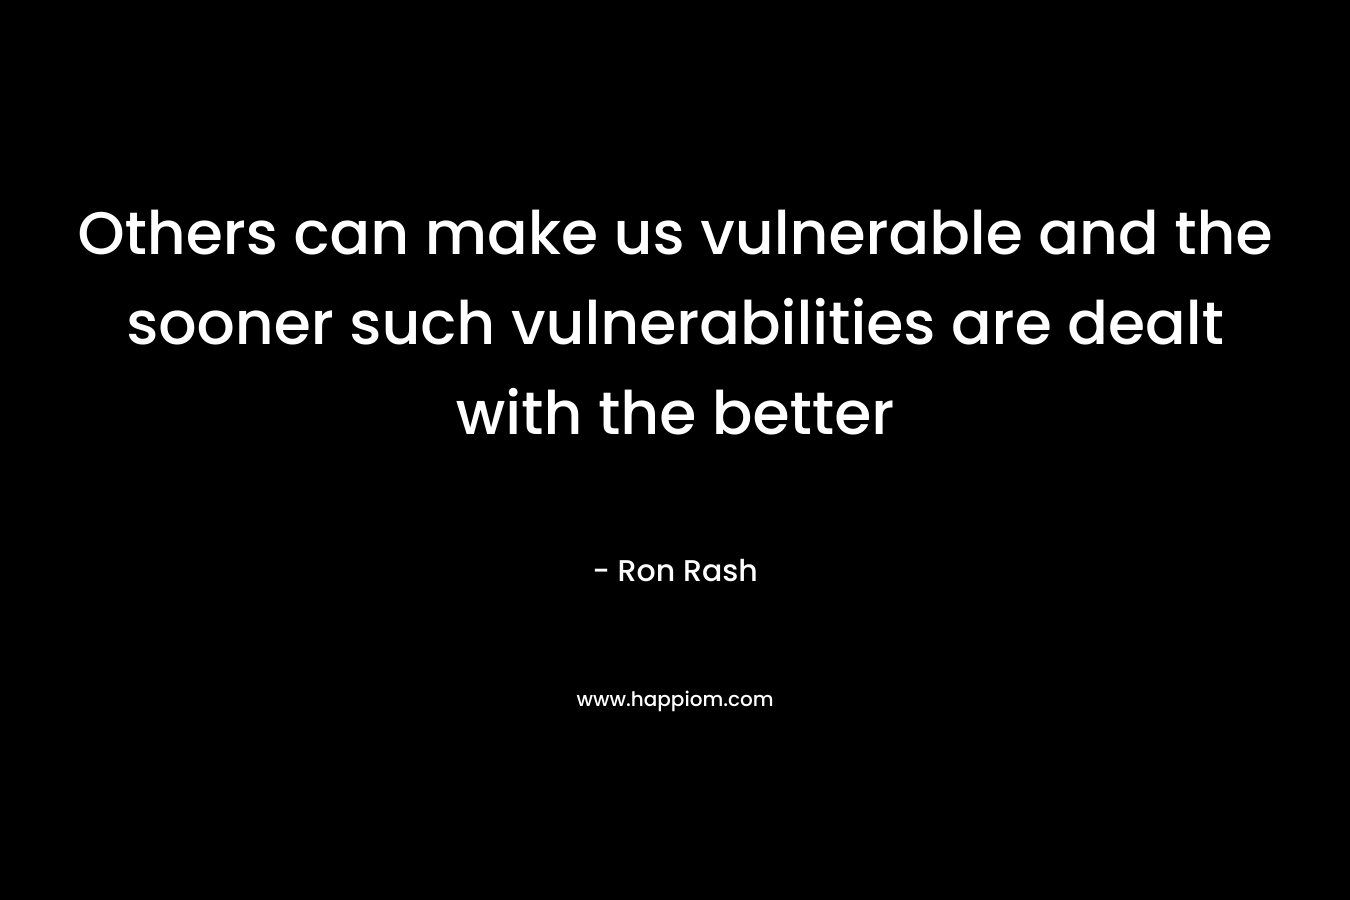 Others can make us vulnerable and the sooner such vulnerabilities are dealt with the better